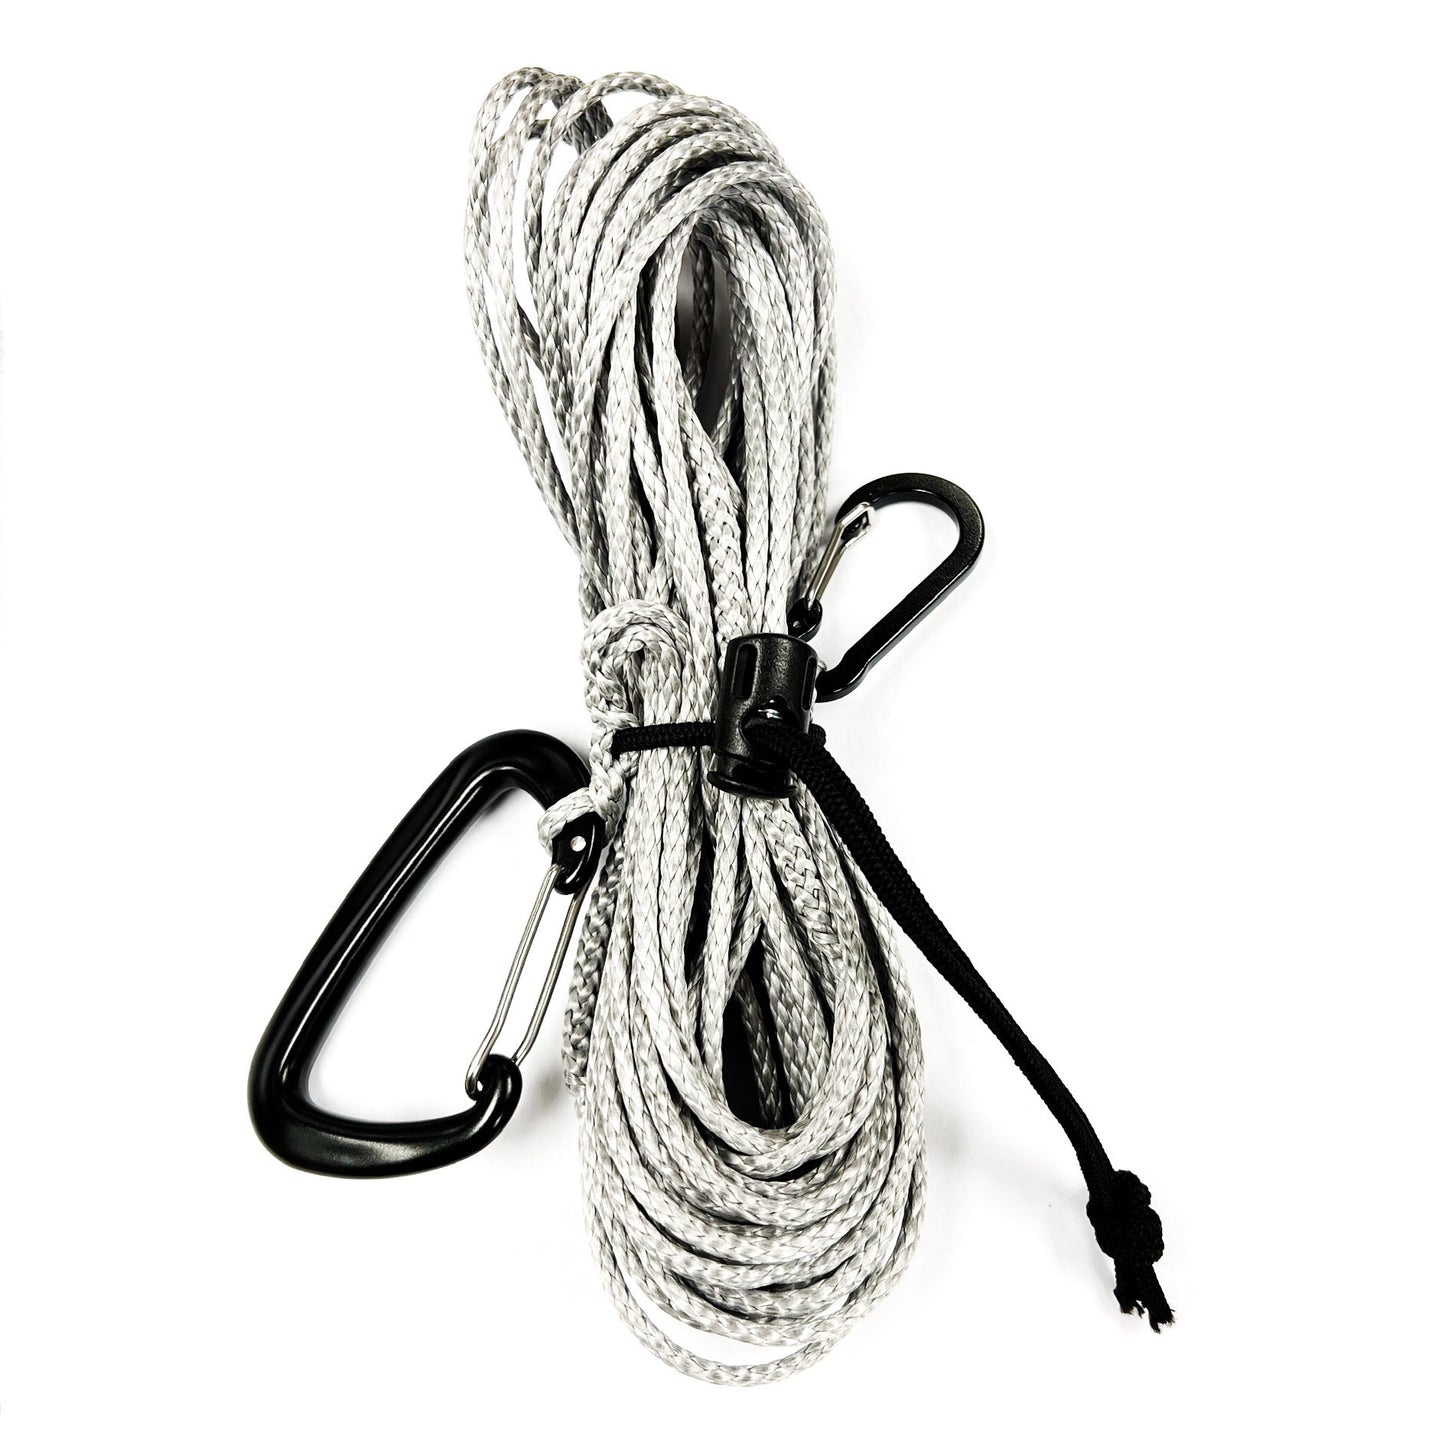 Custom Amsteel Bow Pull Rope With Carabiners 30'